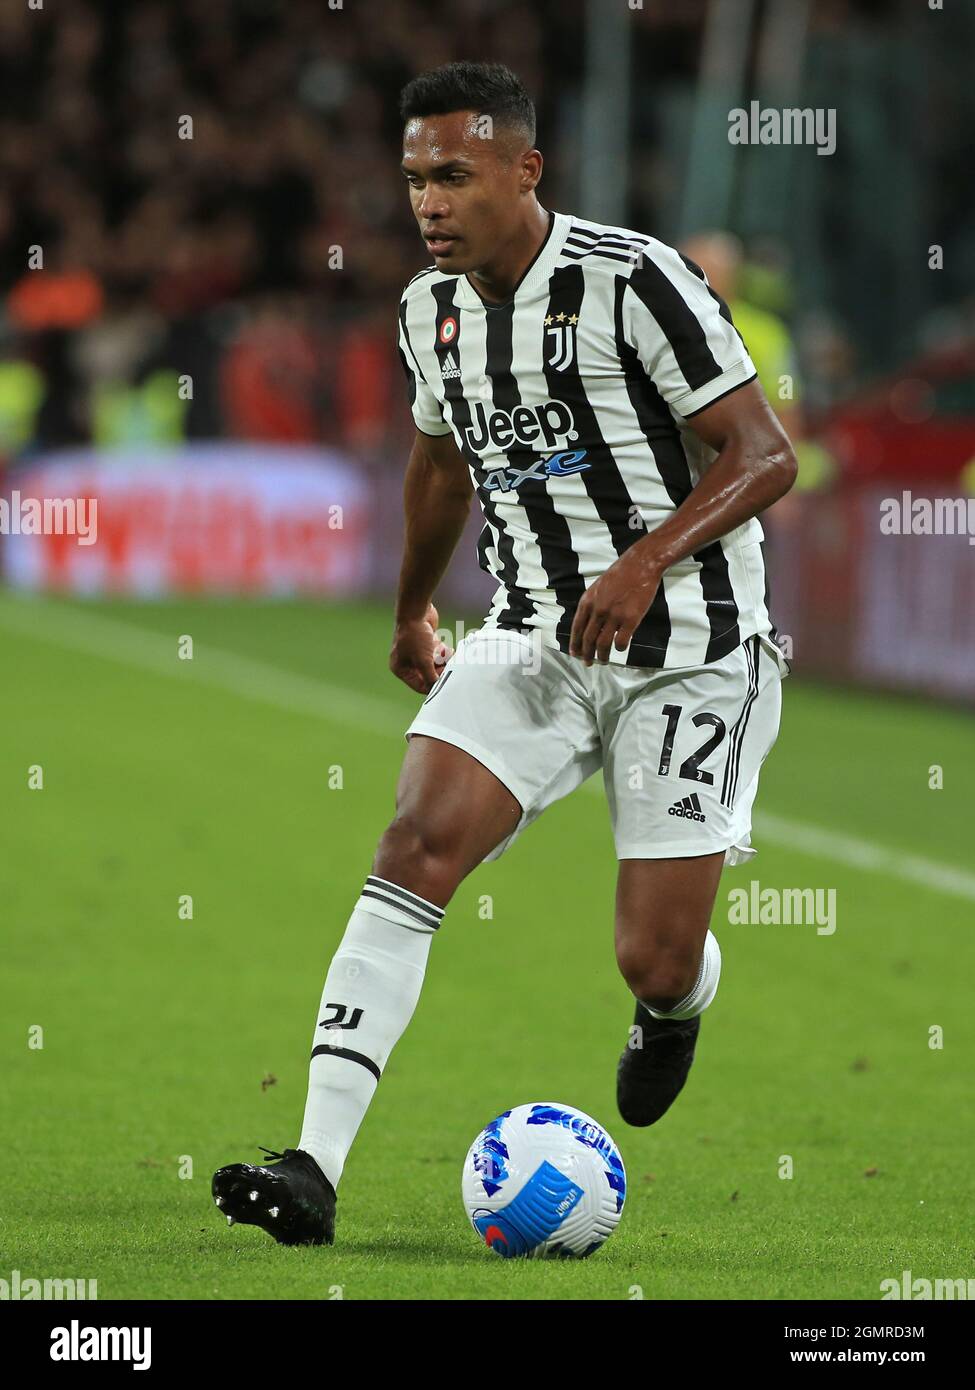 Turin, Italy. 19th Sep, 2021. Alex Sandro Lobo Silva (Juventus FC) during Juventus FC vs AC Milan, Italian football Serie A match in Turin, Italy, September 19 2021 Credit: Independent Photo Agency/Alamy Live News Stock Photo